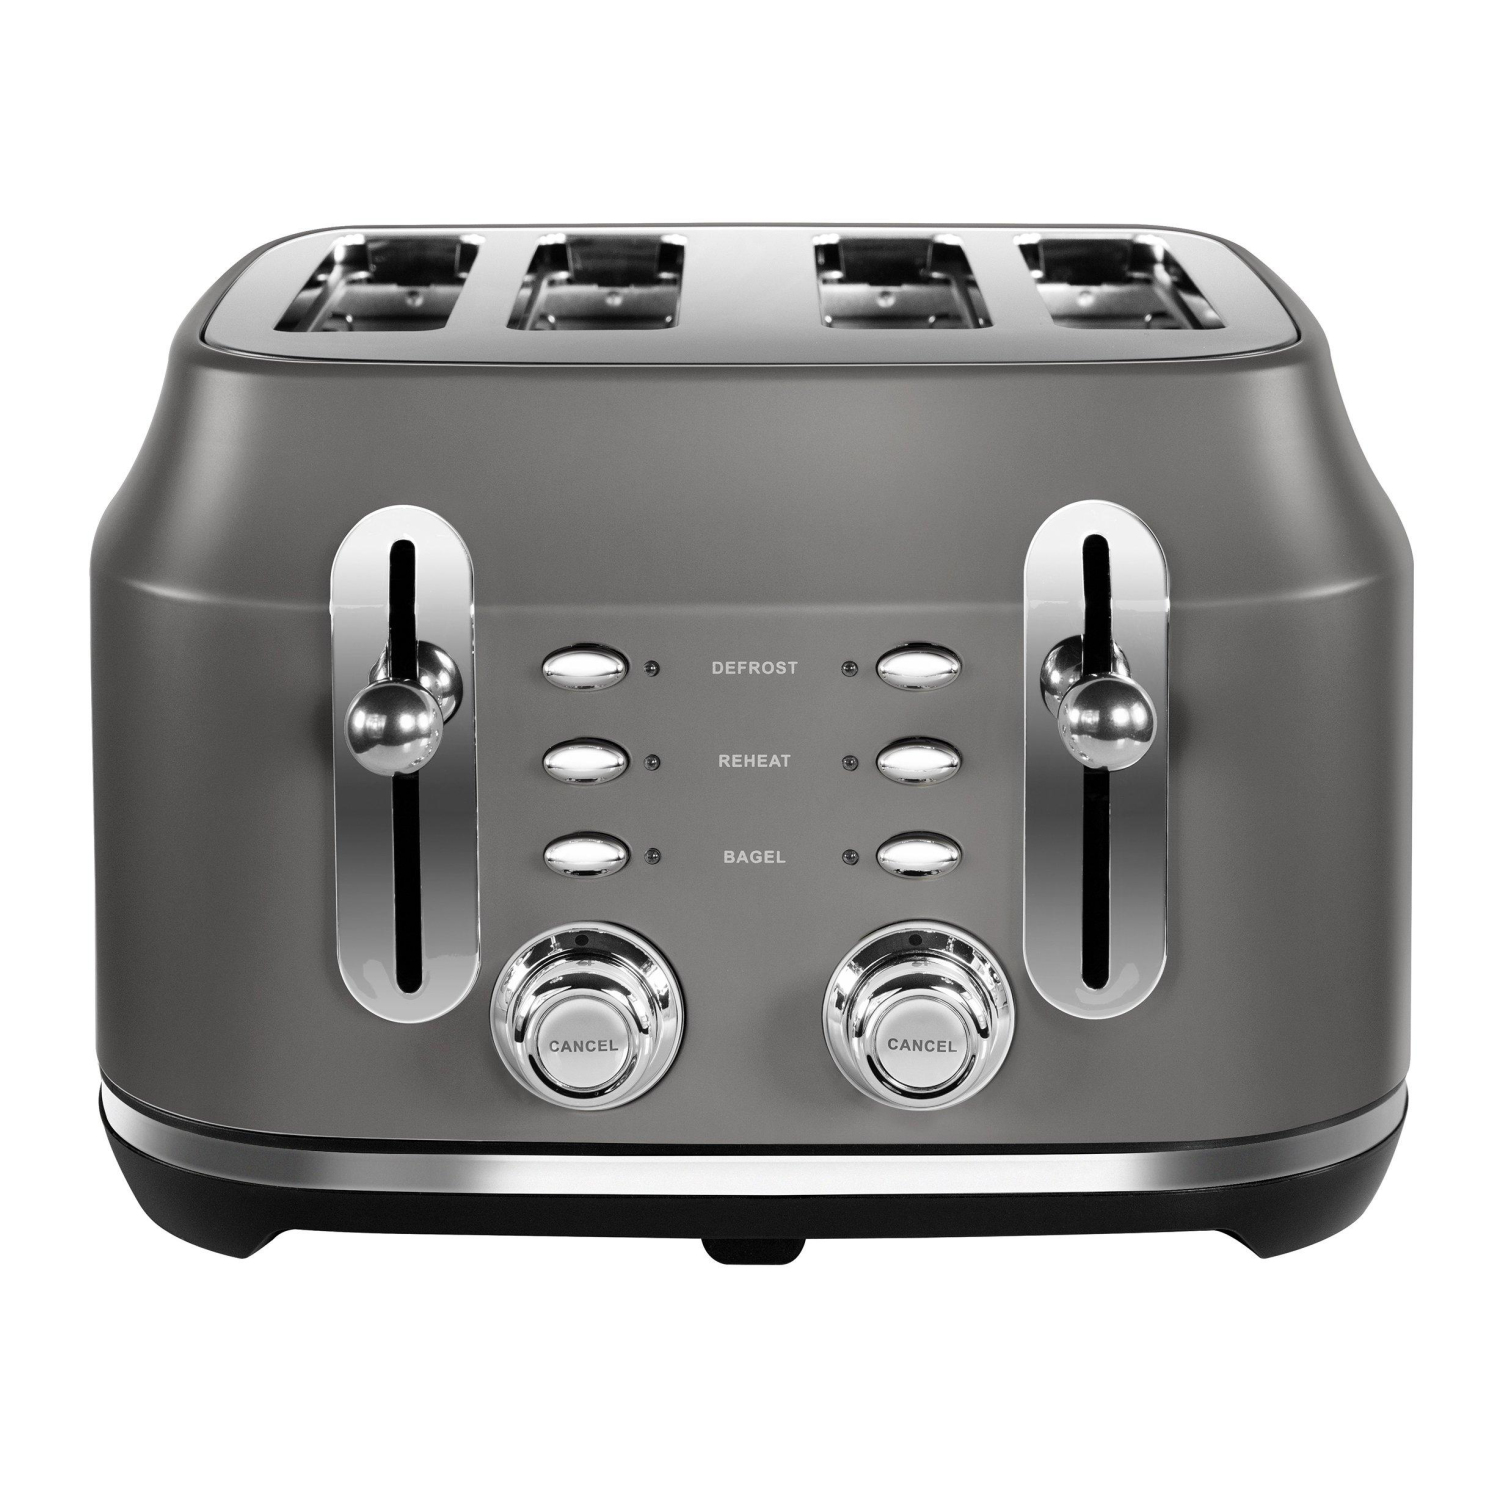 Rangemaster RMCL4S201GY 4 Slice Toaster - Matte Slate Grey - 5